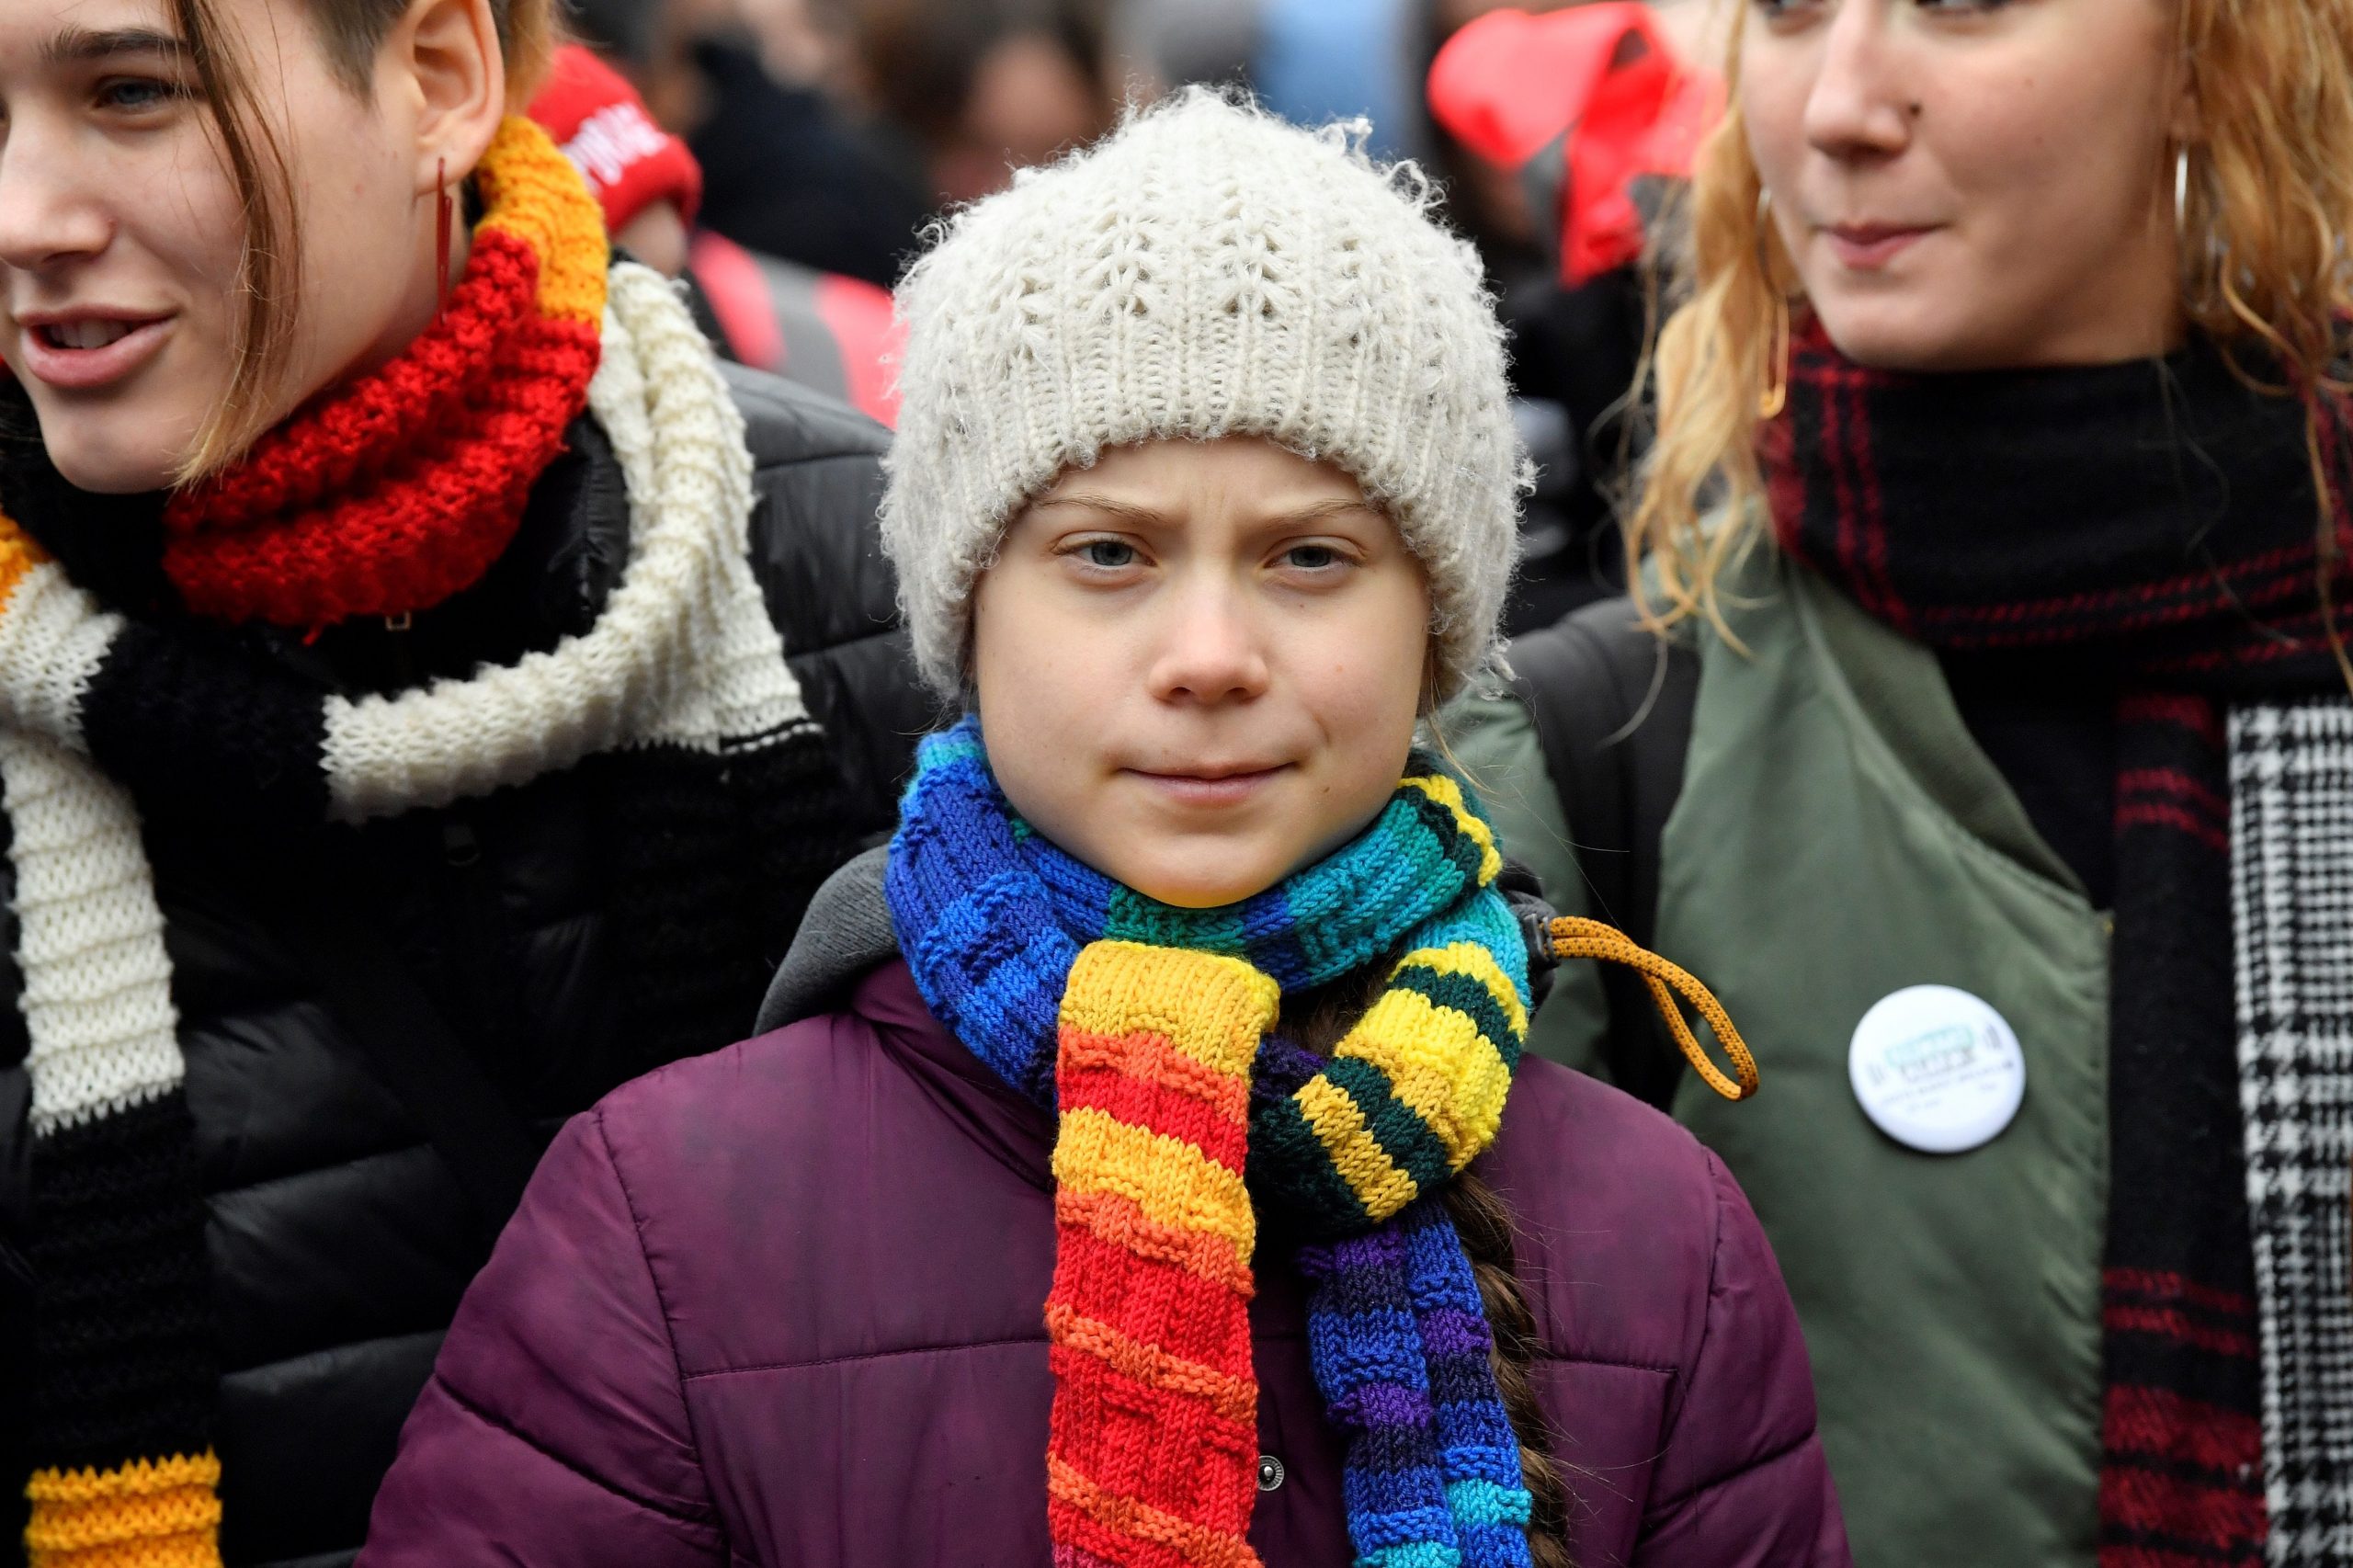 Greta Thunberg looking downcast at a climate change protest in 2019.